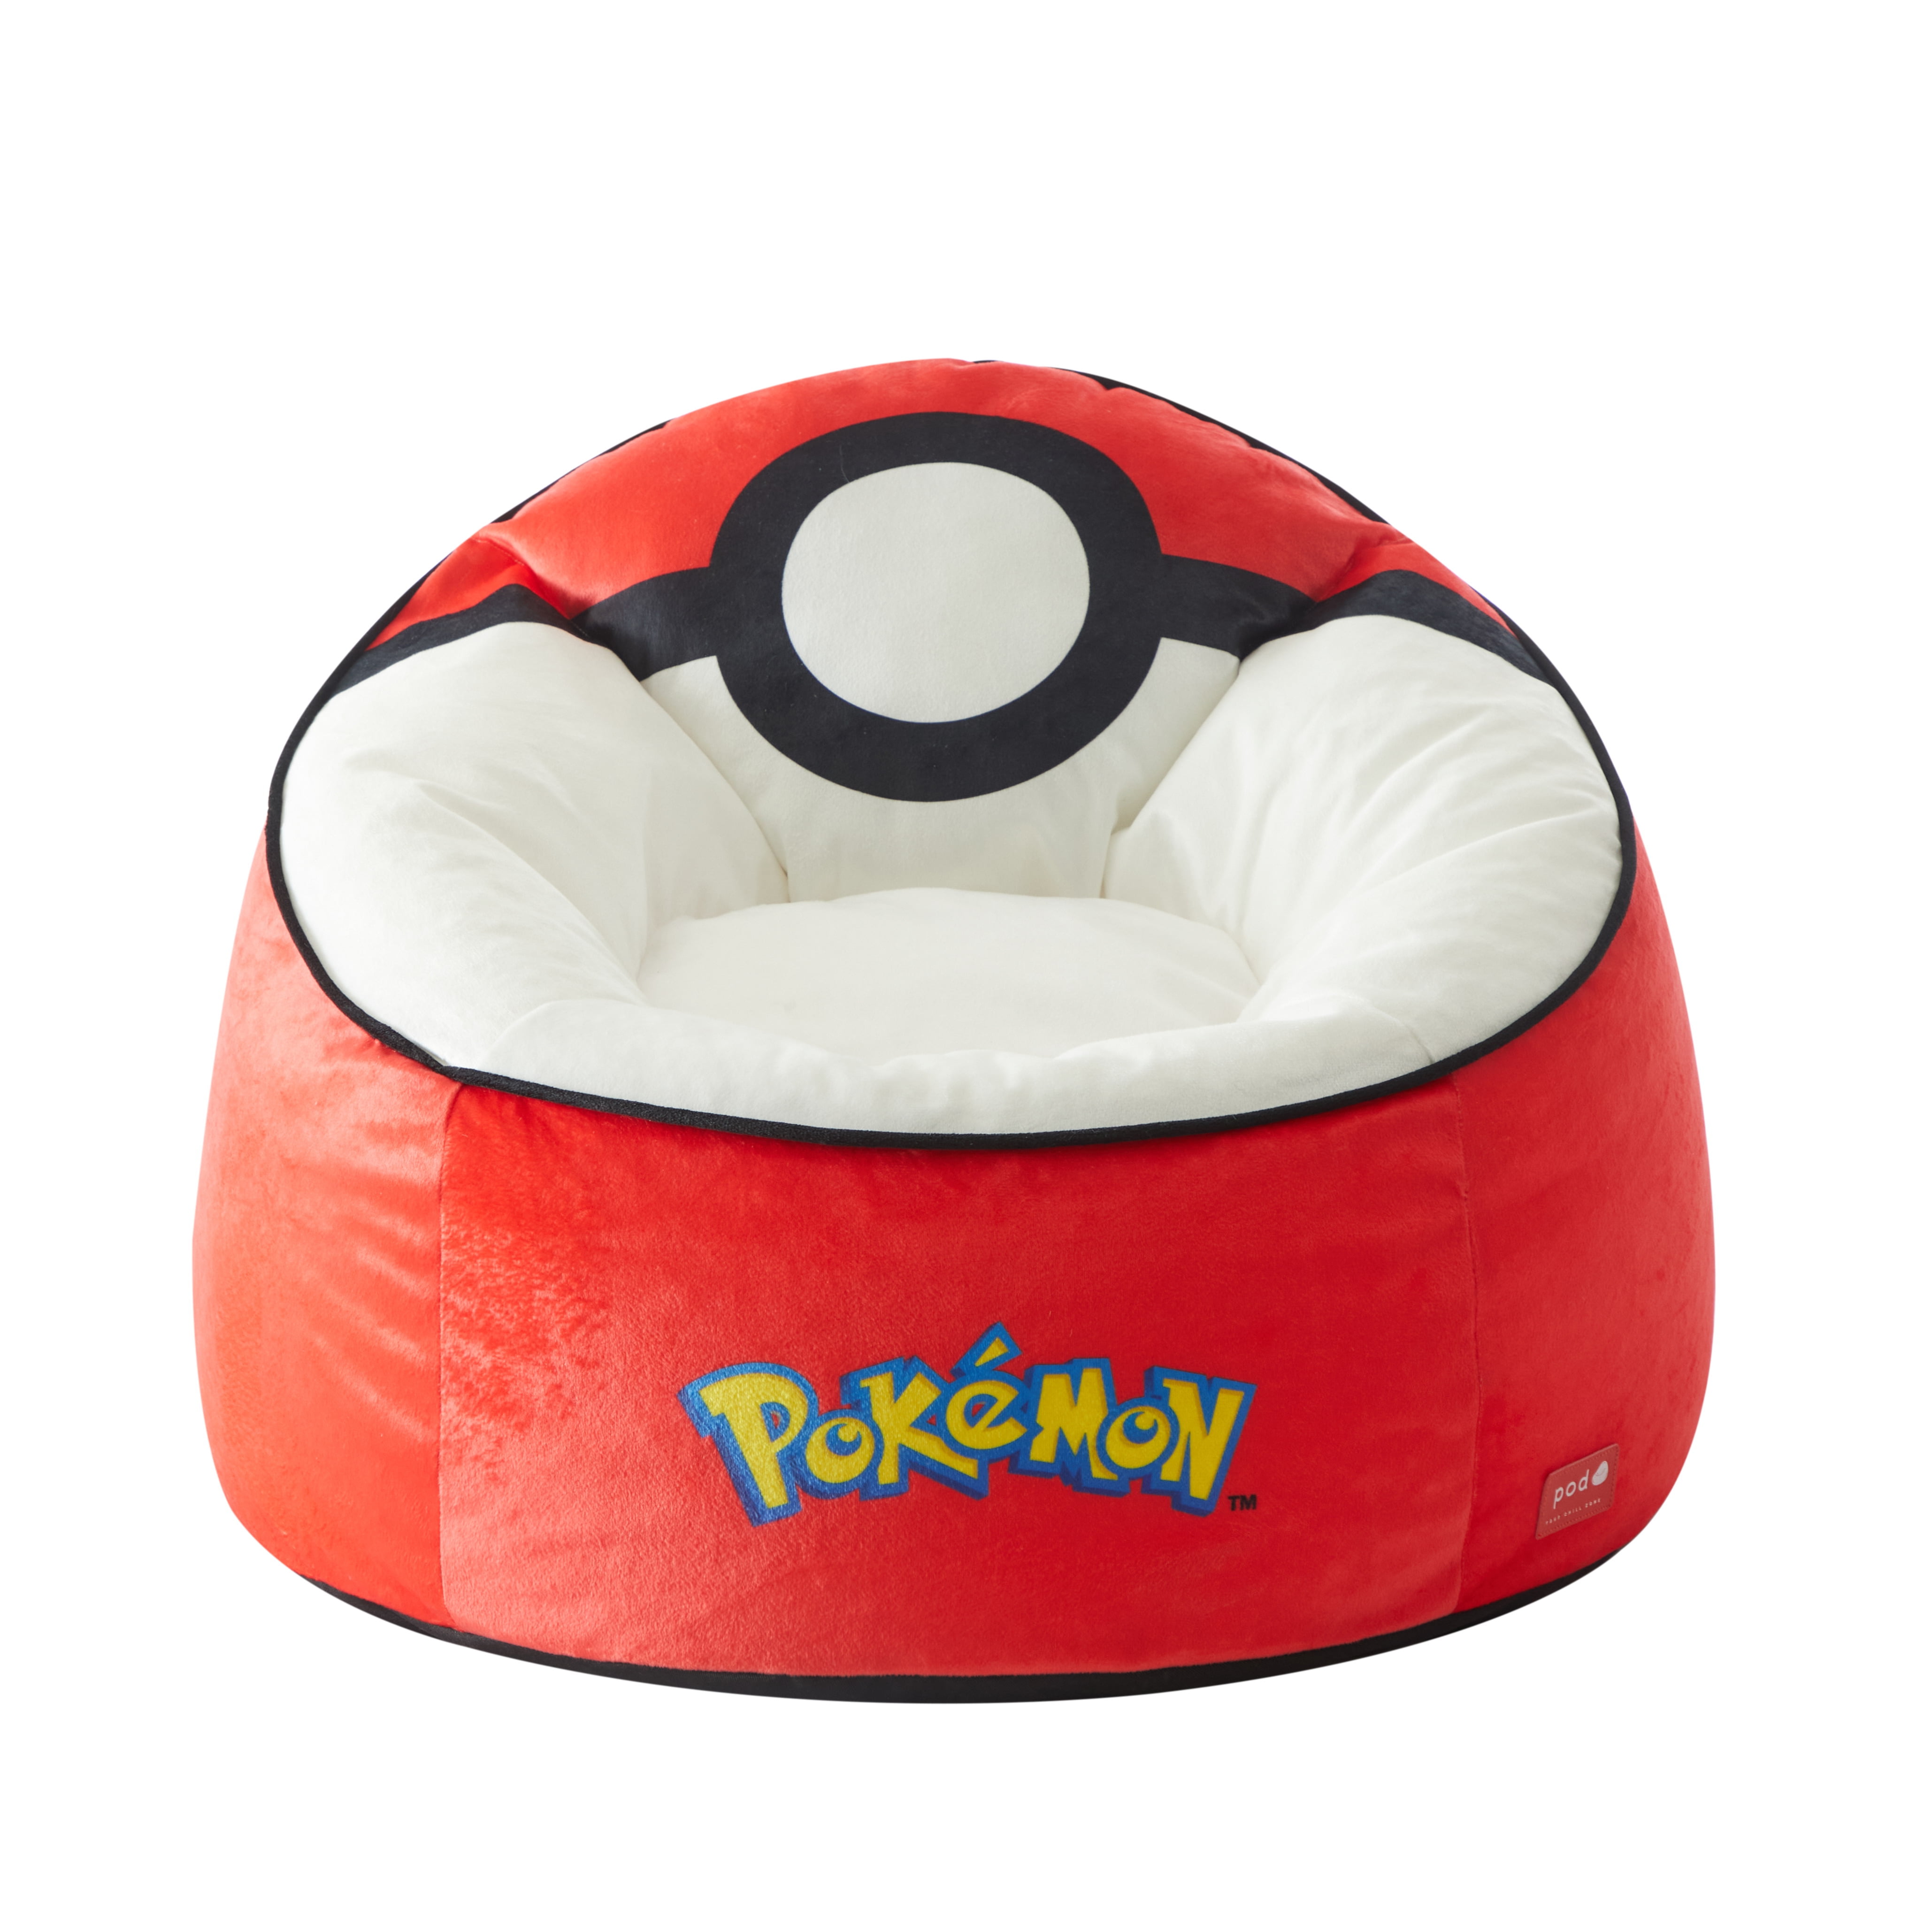 PokéJungle: Pokémon Game & Merch News on X: The Snorlax and Ditto  @yogibobags bean bag chairs are now available for purchase at the US/CA  Pokémon Center Online   / X